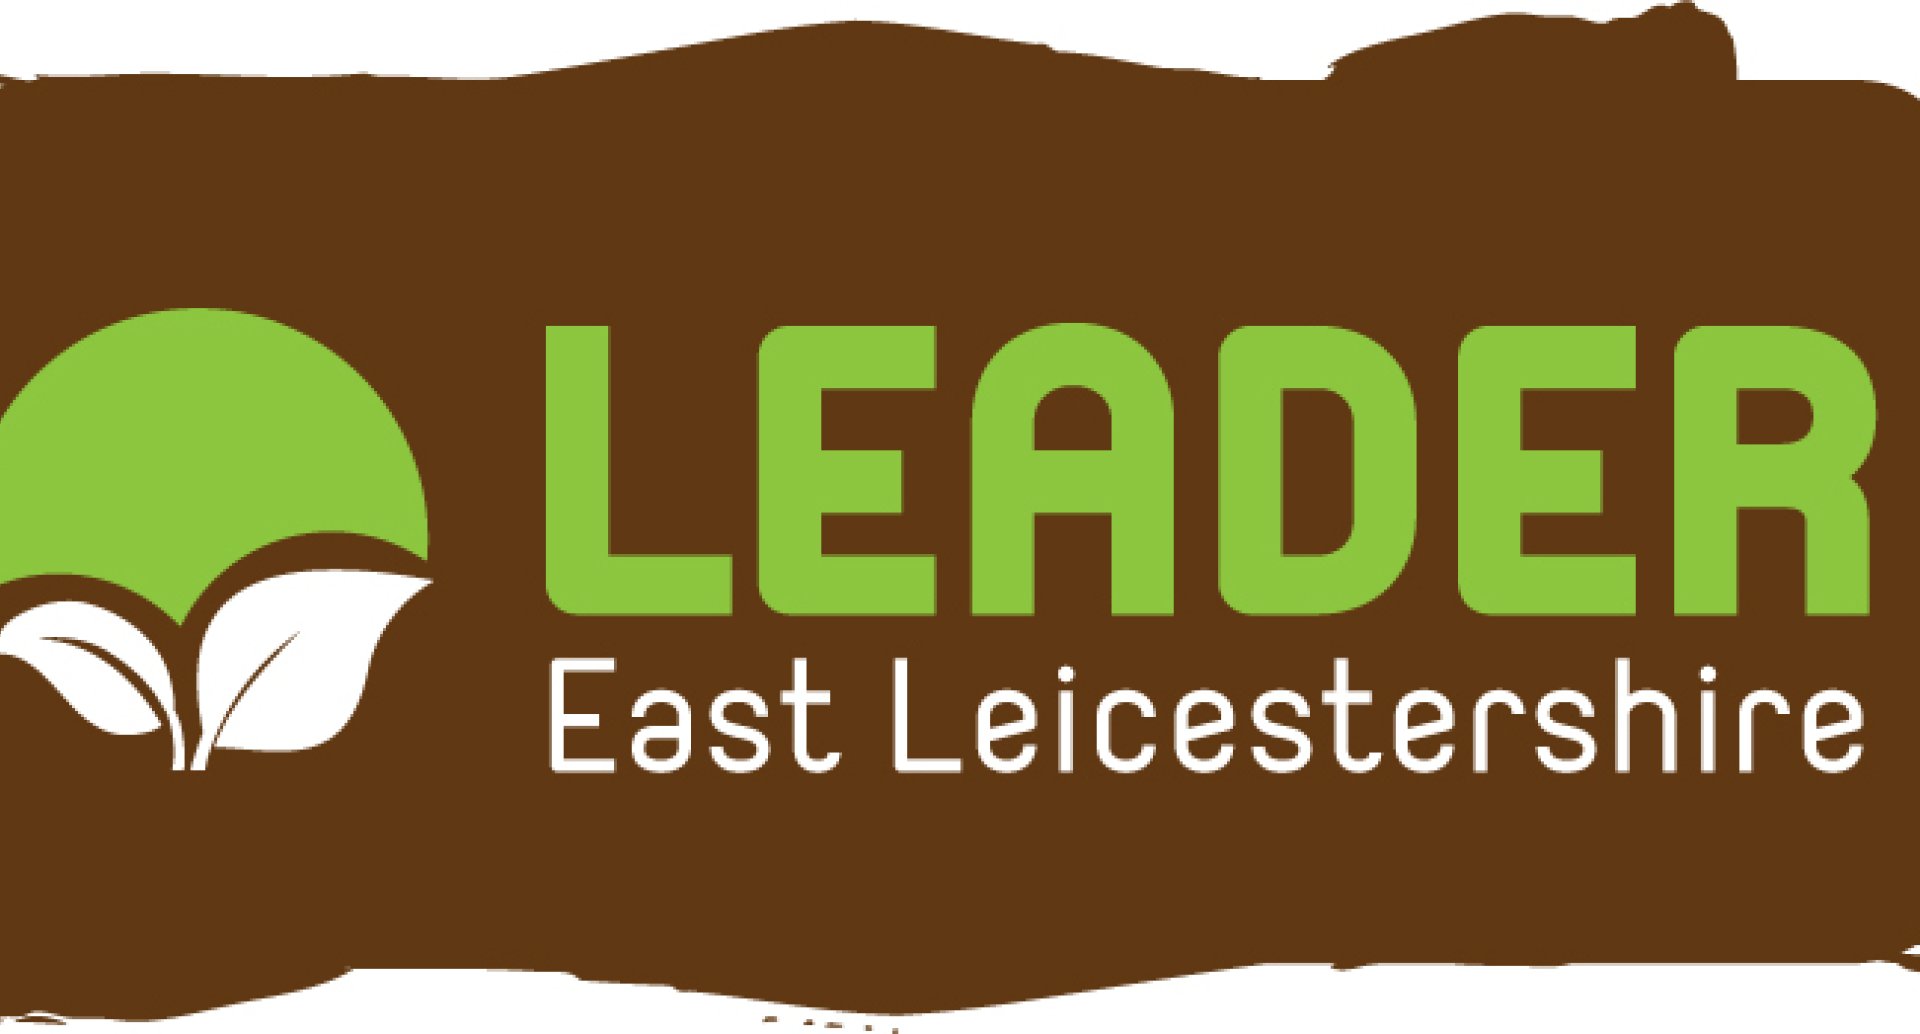 East Leicestershire LEADER